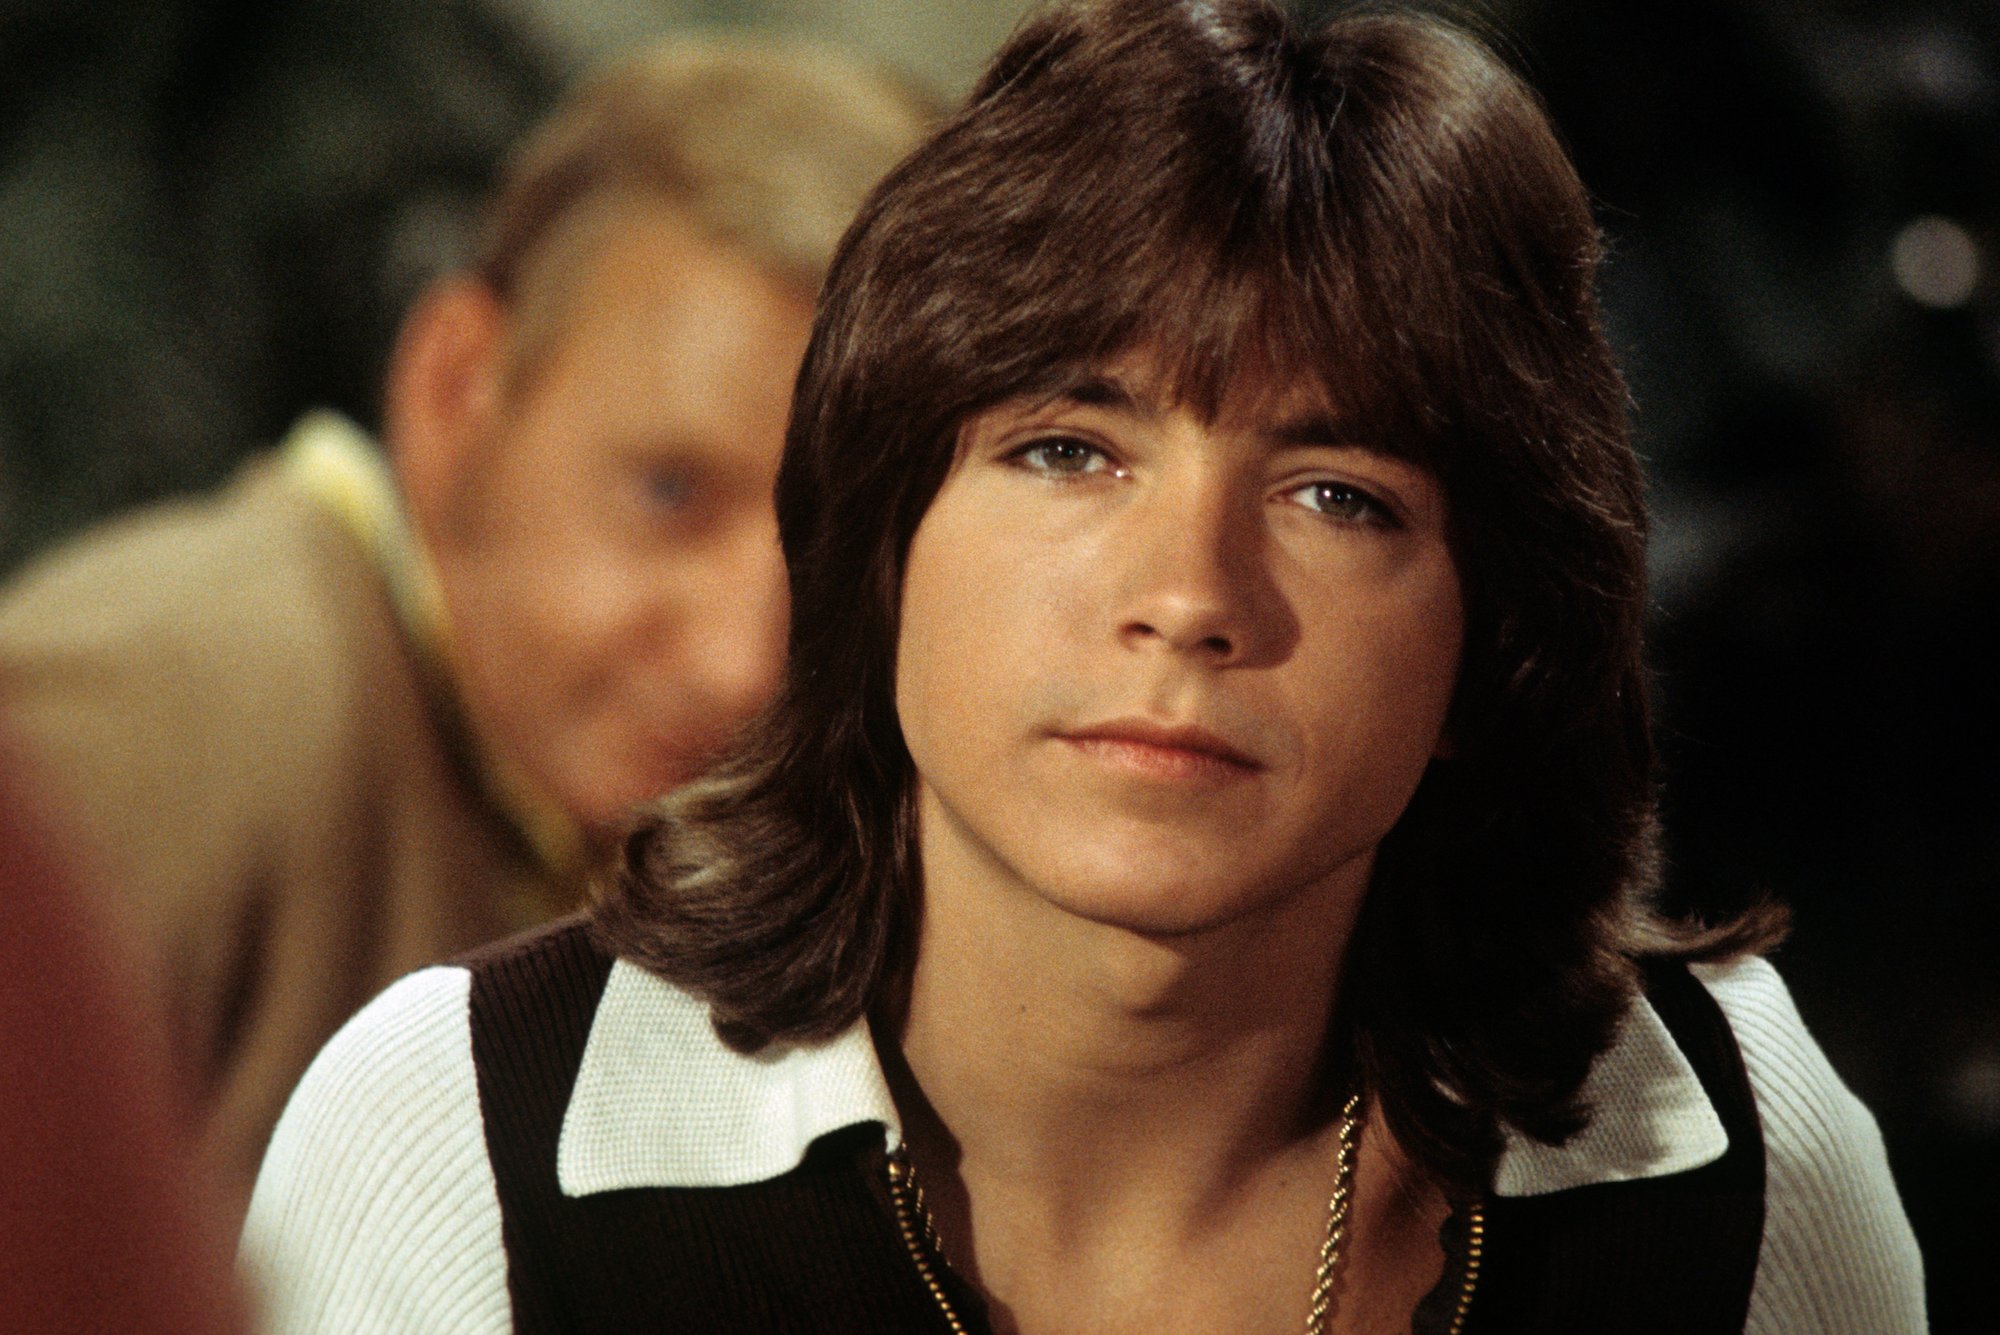 Exclusive PHOTO-David Cassidy at home-1970 The PARTRIDGE FAMILY TV star #6 